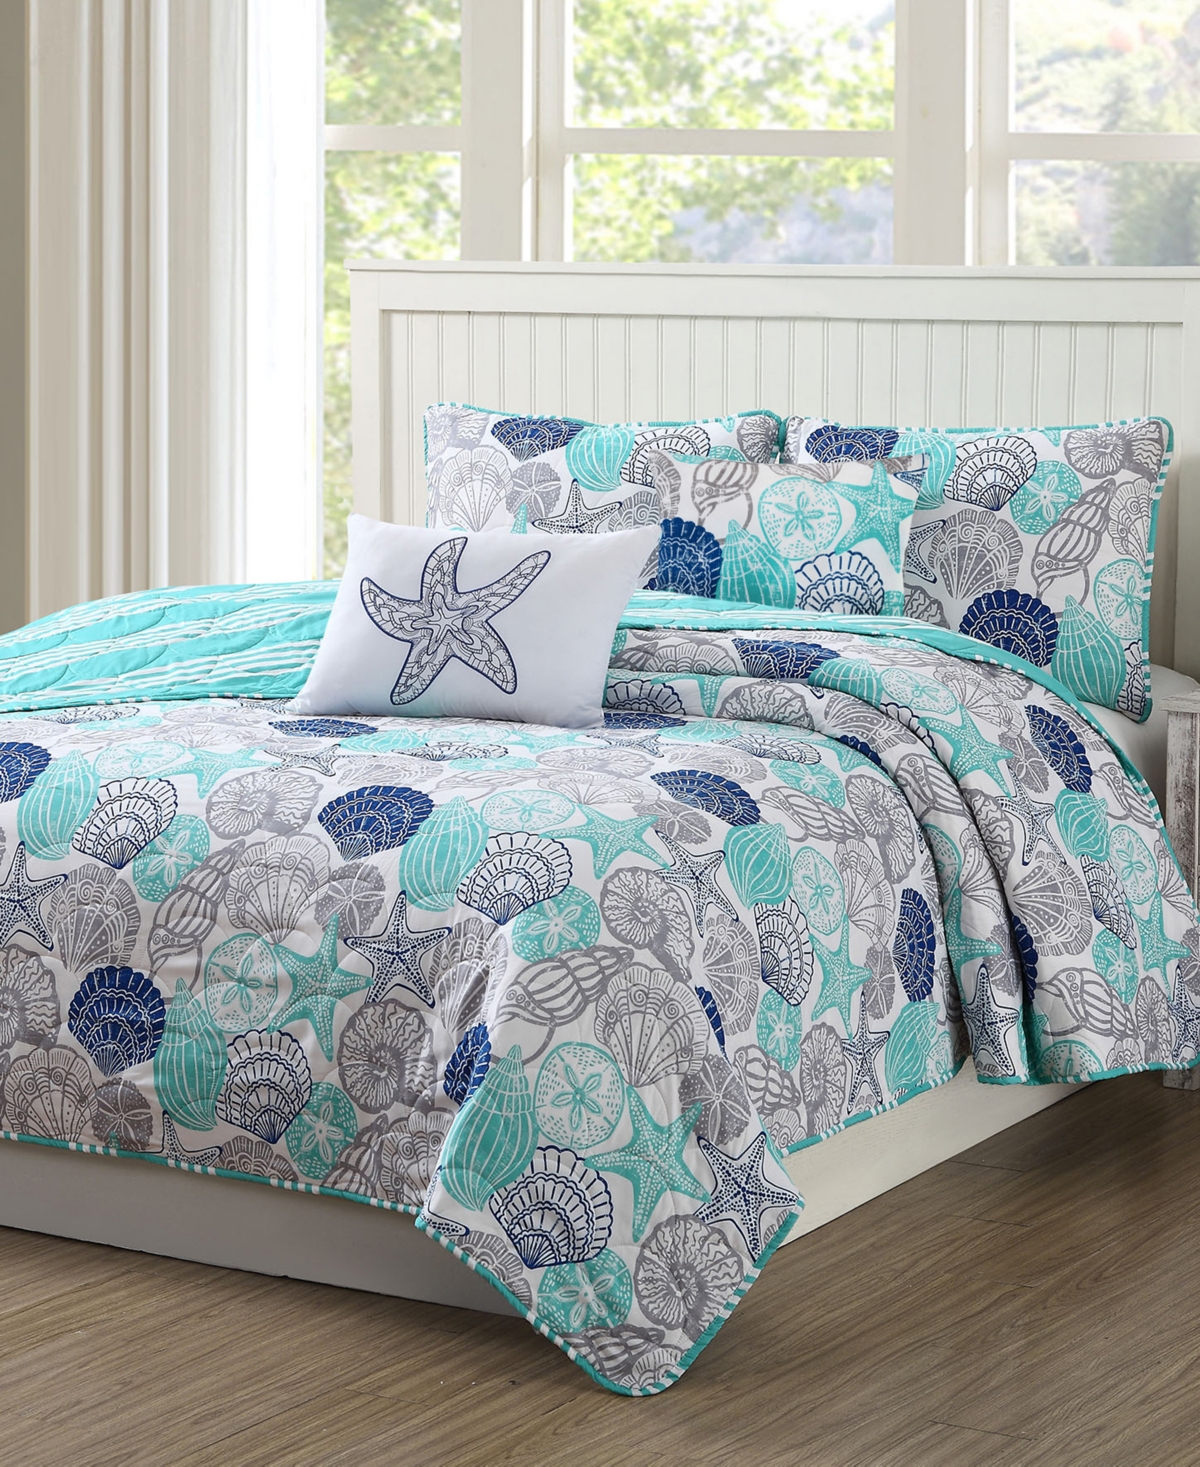 Seashell and Starfish Print Reversible 5 Piece Quilt Set, King Bedding